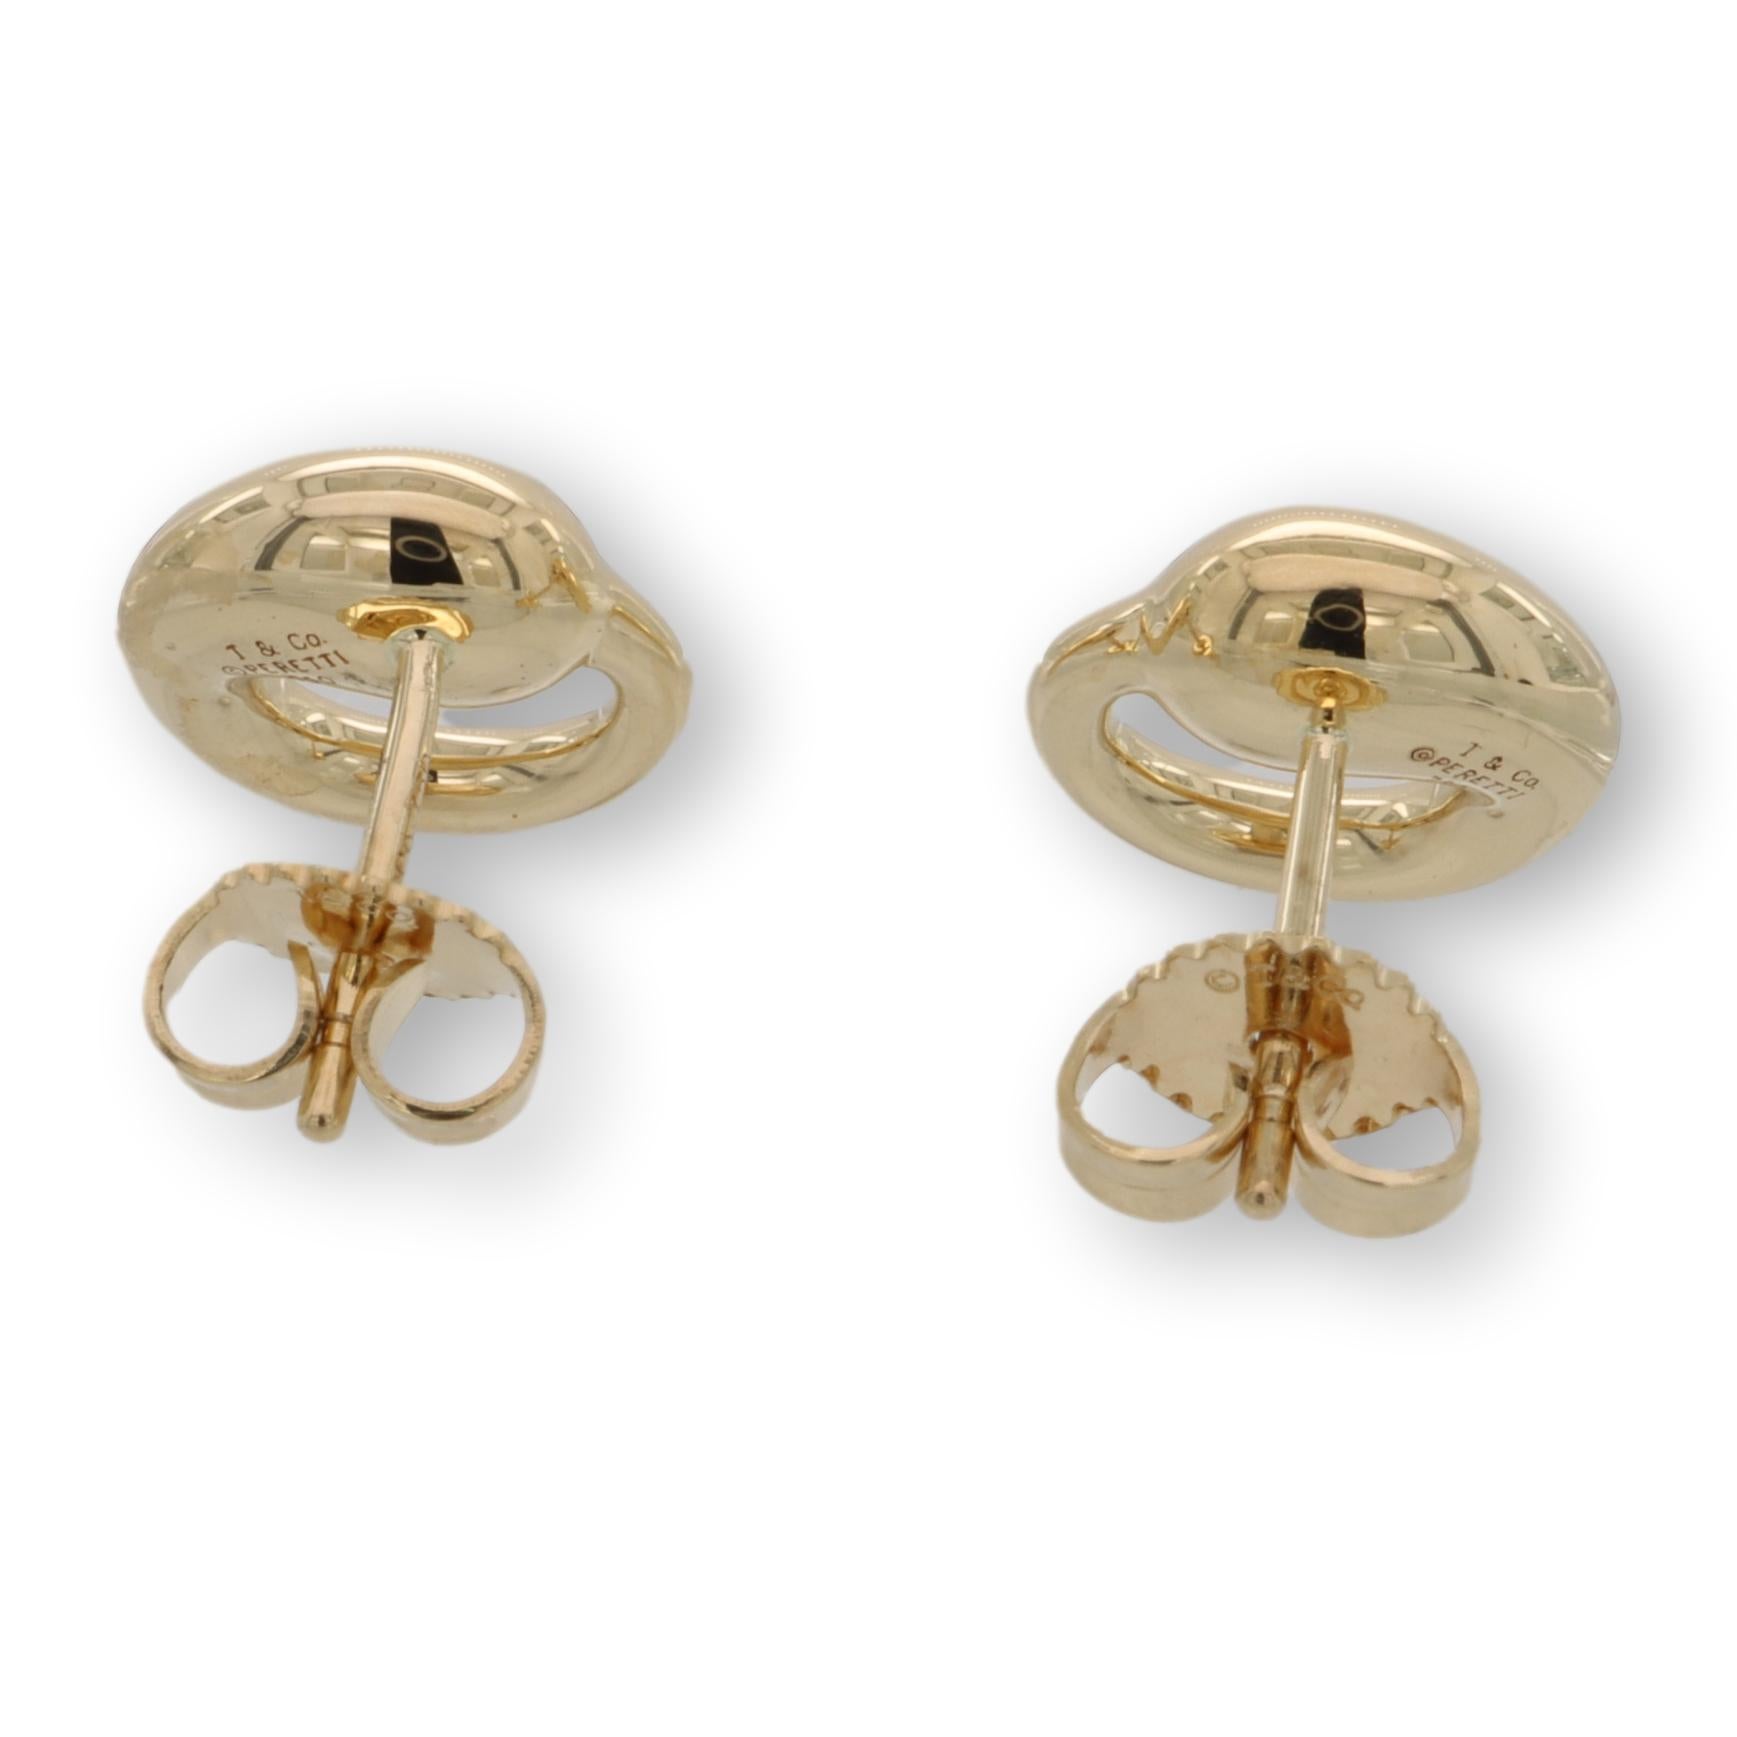 Vintage Tiffany & Co. stud earrings designed by Elsa Peretti from the eternal circle collection finely crafted in 18 karat yellow gold with posts and butterfly small backs. Fully hallmarked with designer logos and metal content. This is a